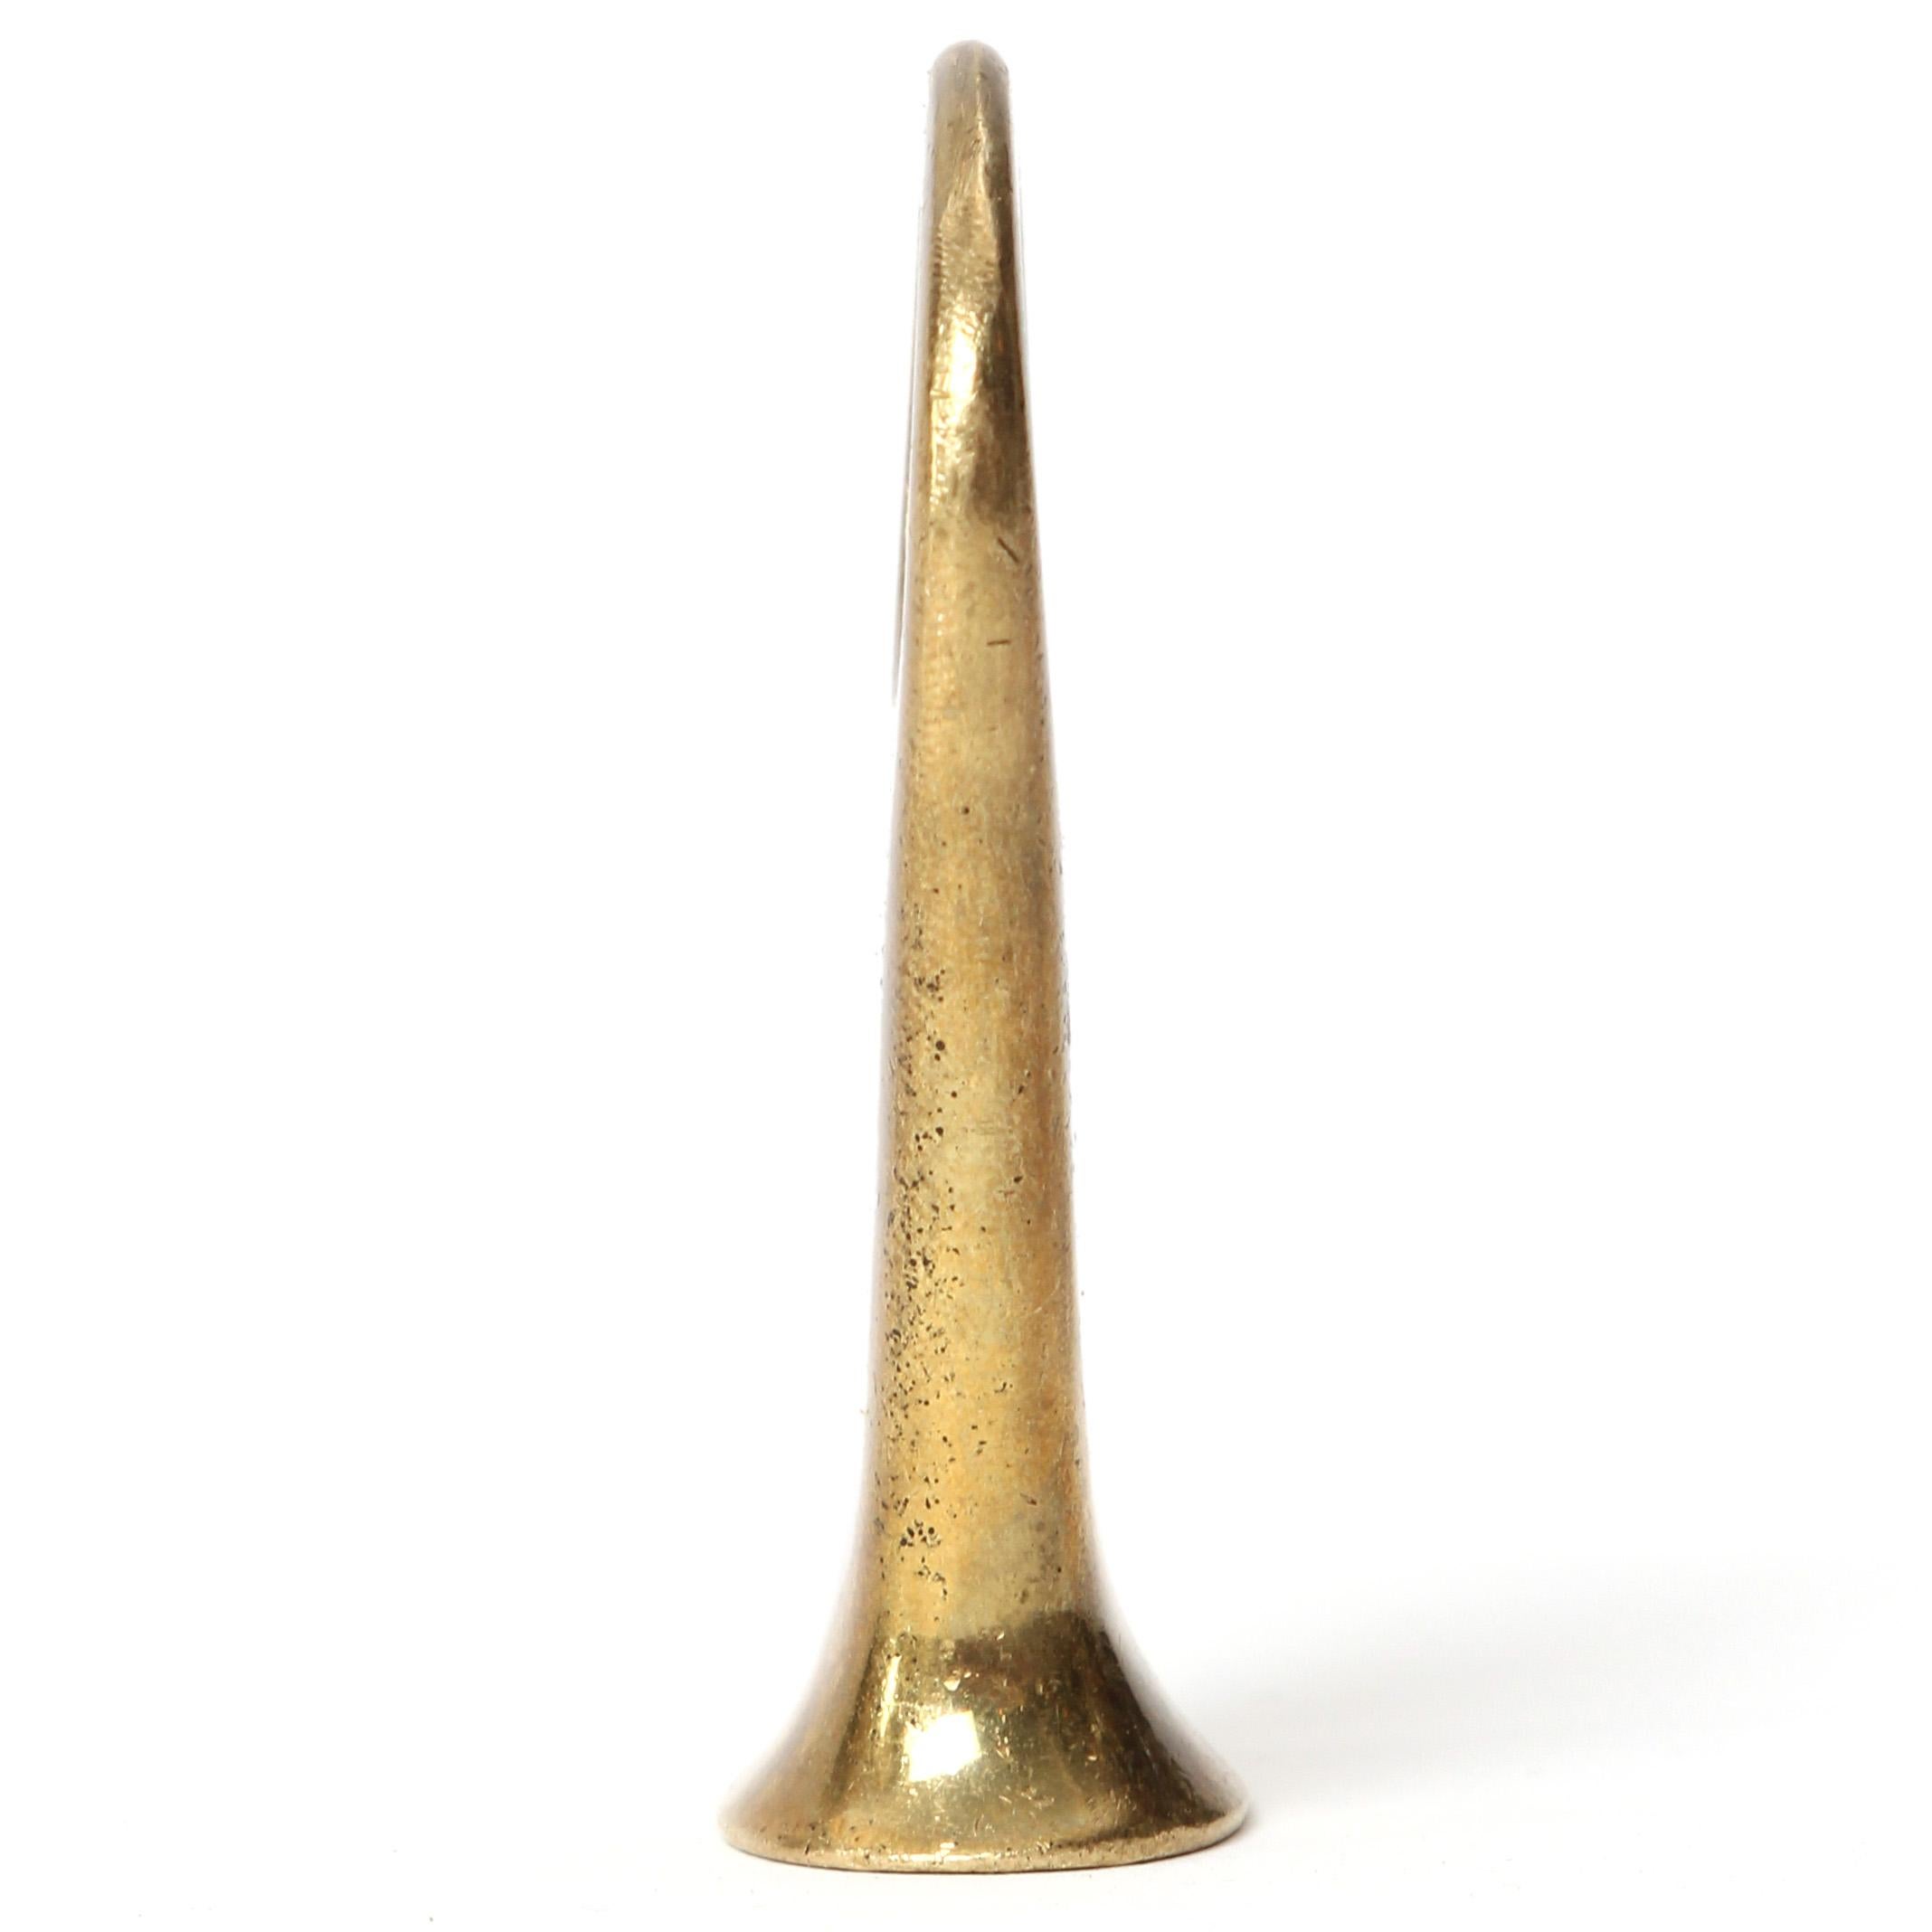 A finely modeled and well-patinated Mid-Century Modern brass bottle opener having a flattened end enabling it to stand. Designed and manufactured by Carl Aubock in Austria, 1950s.